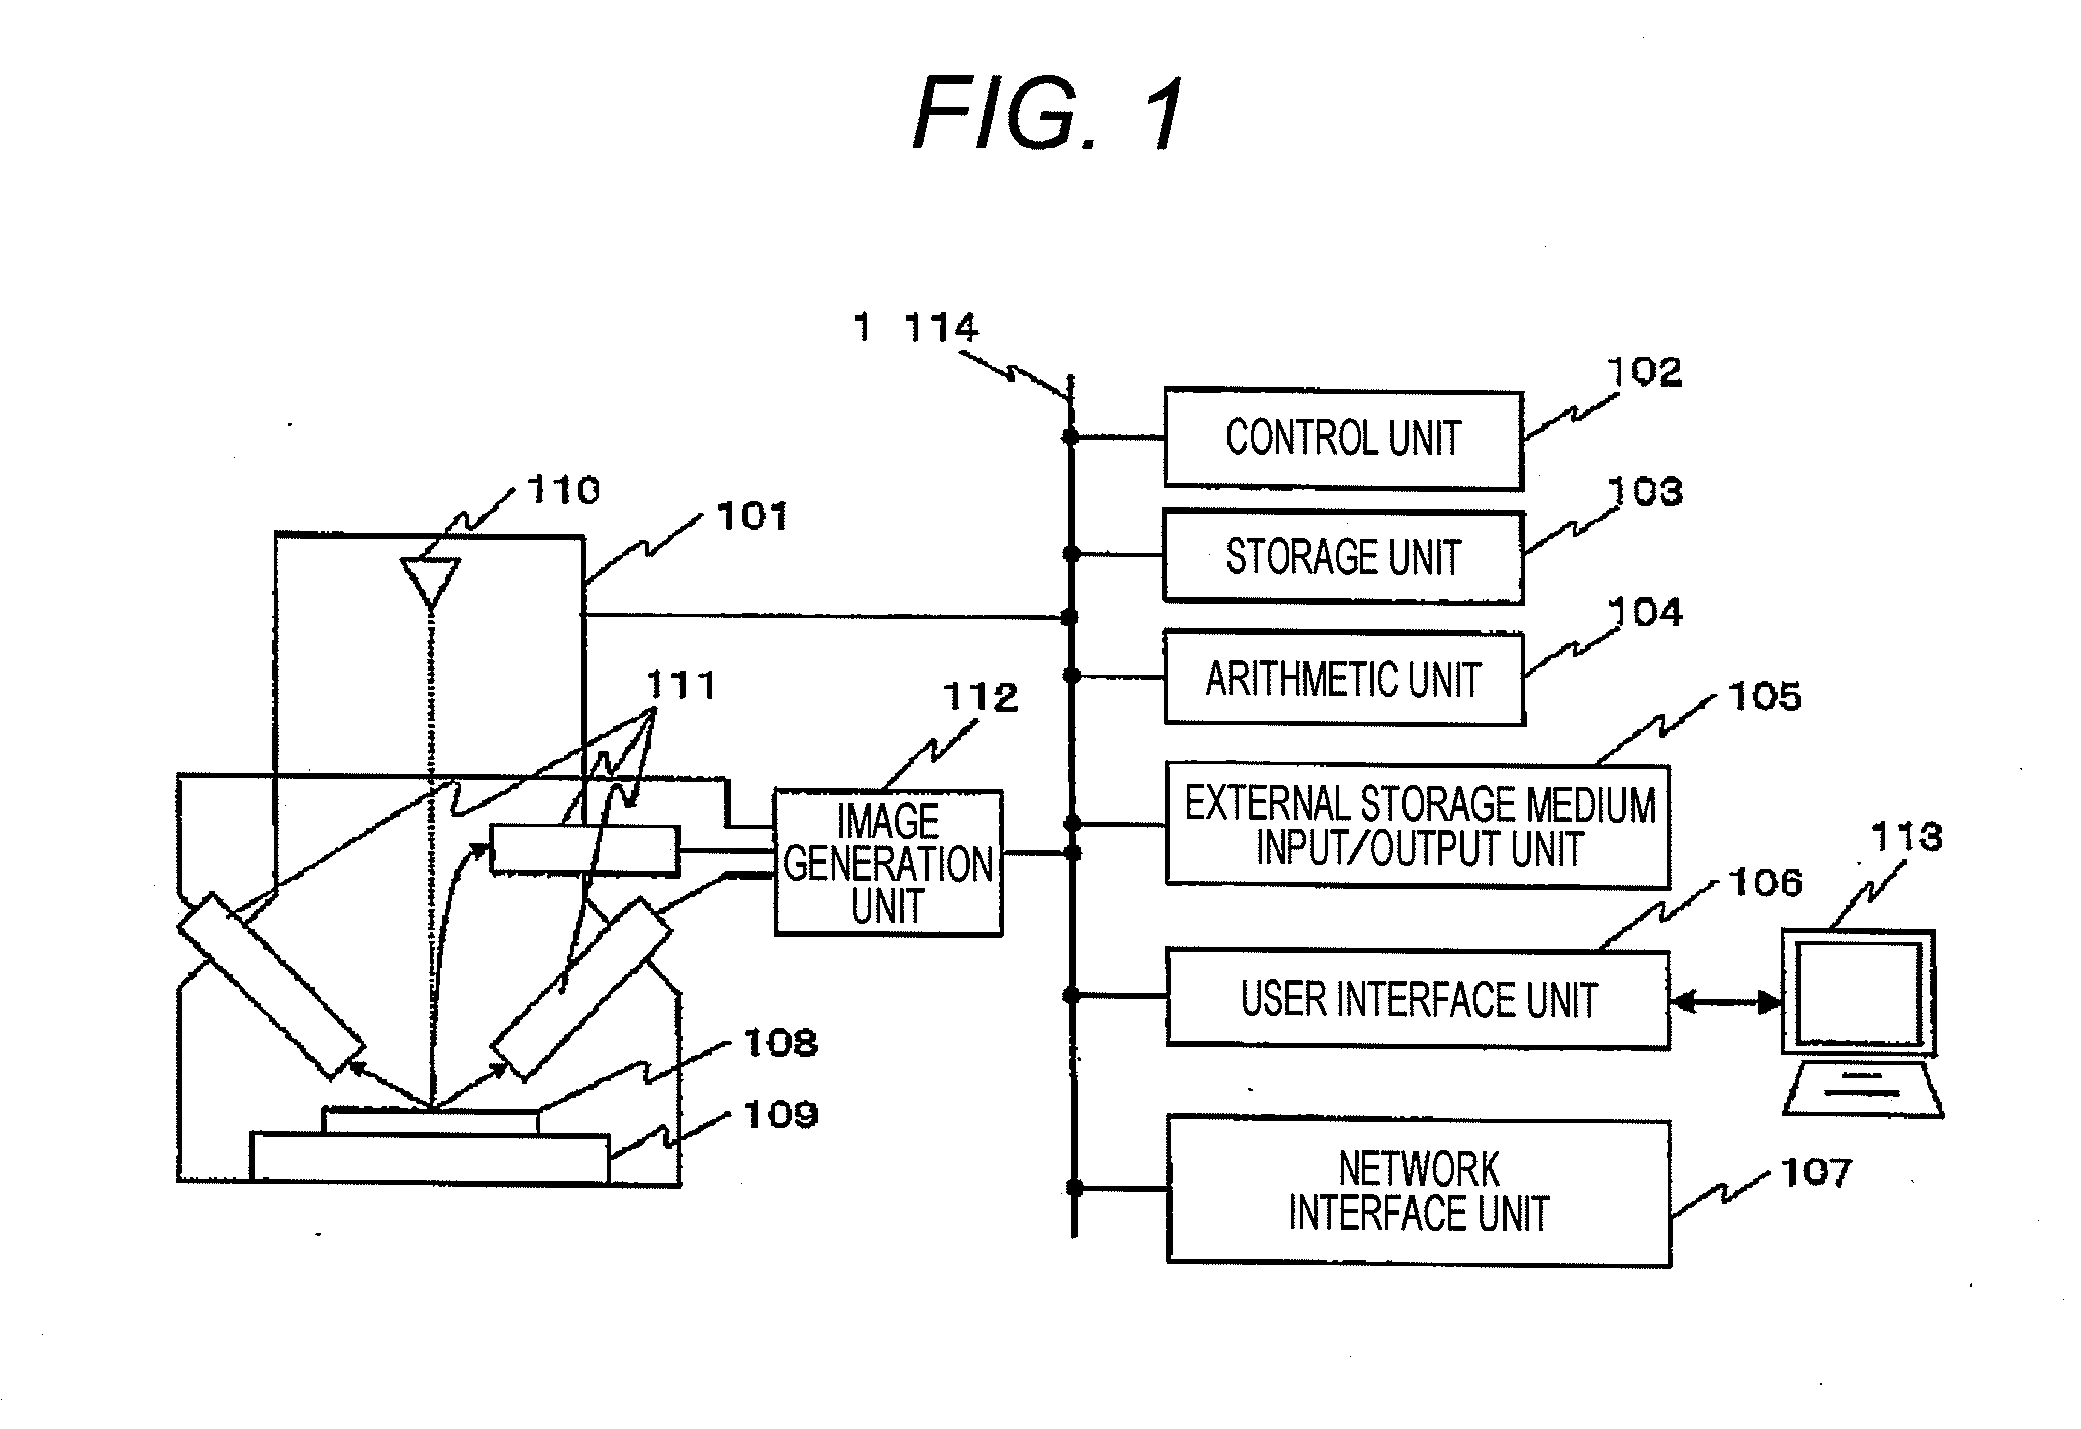 Method for measuring overlay and measuring apparatus, scanning electron microscope, and GUI